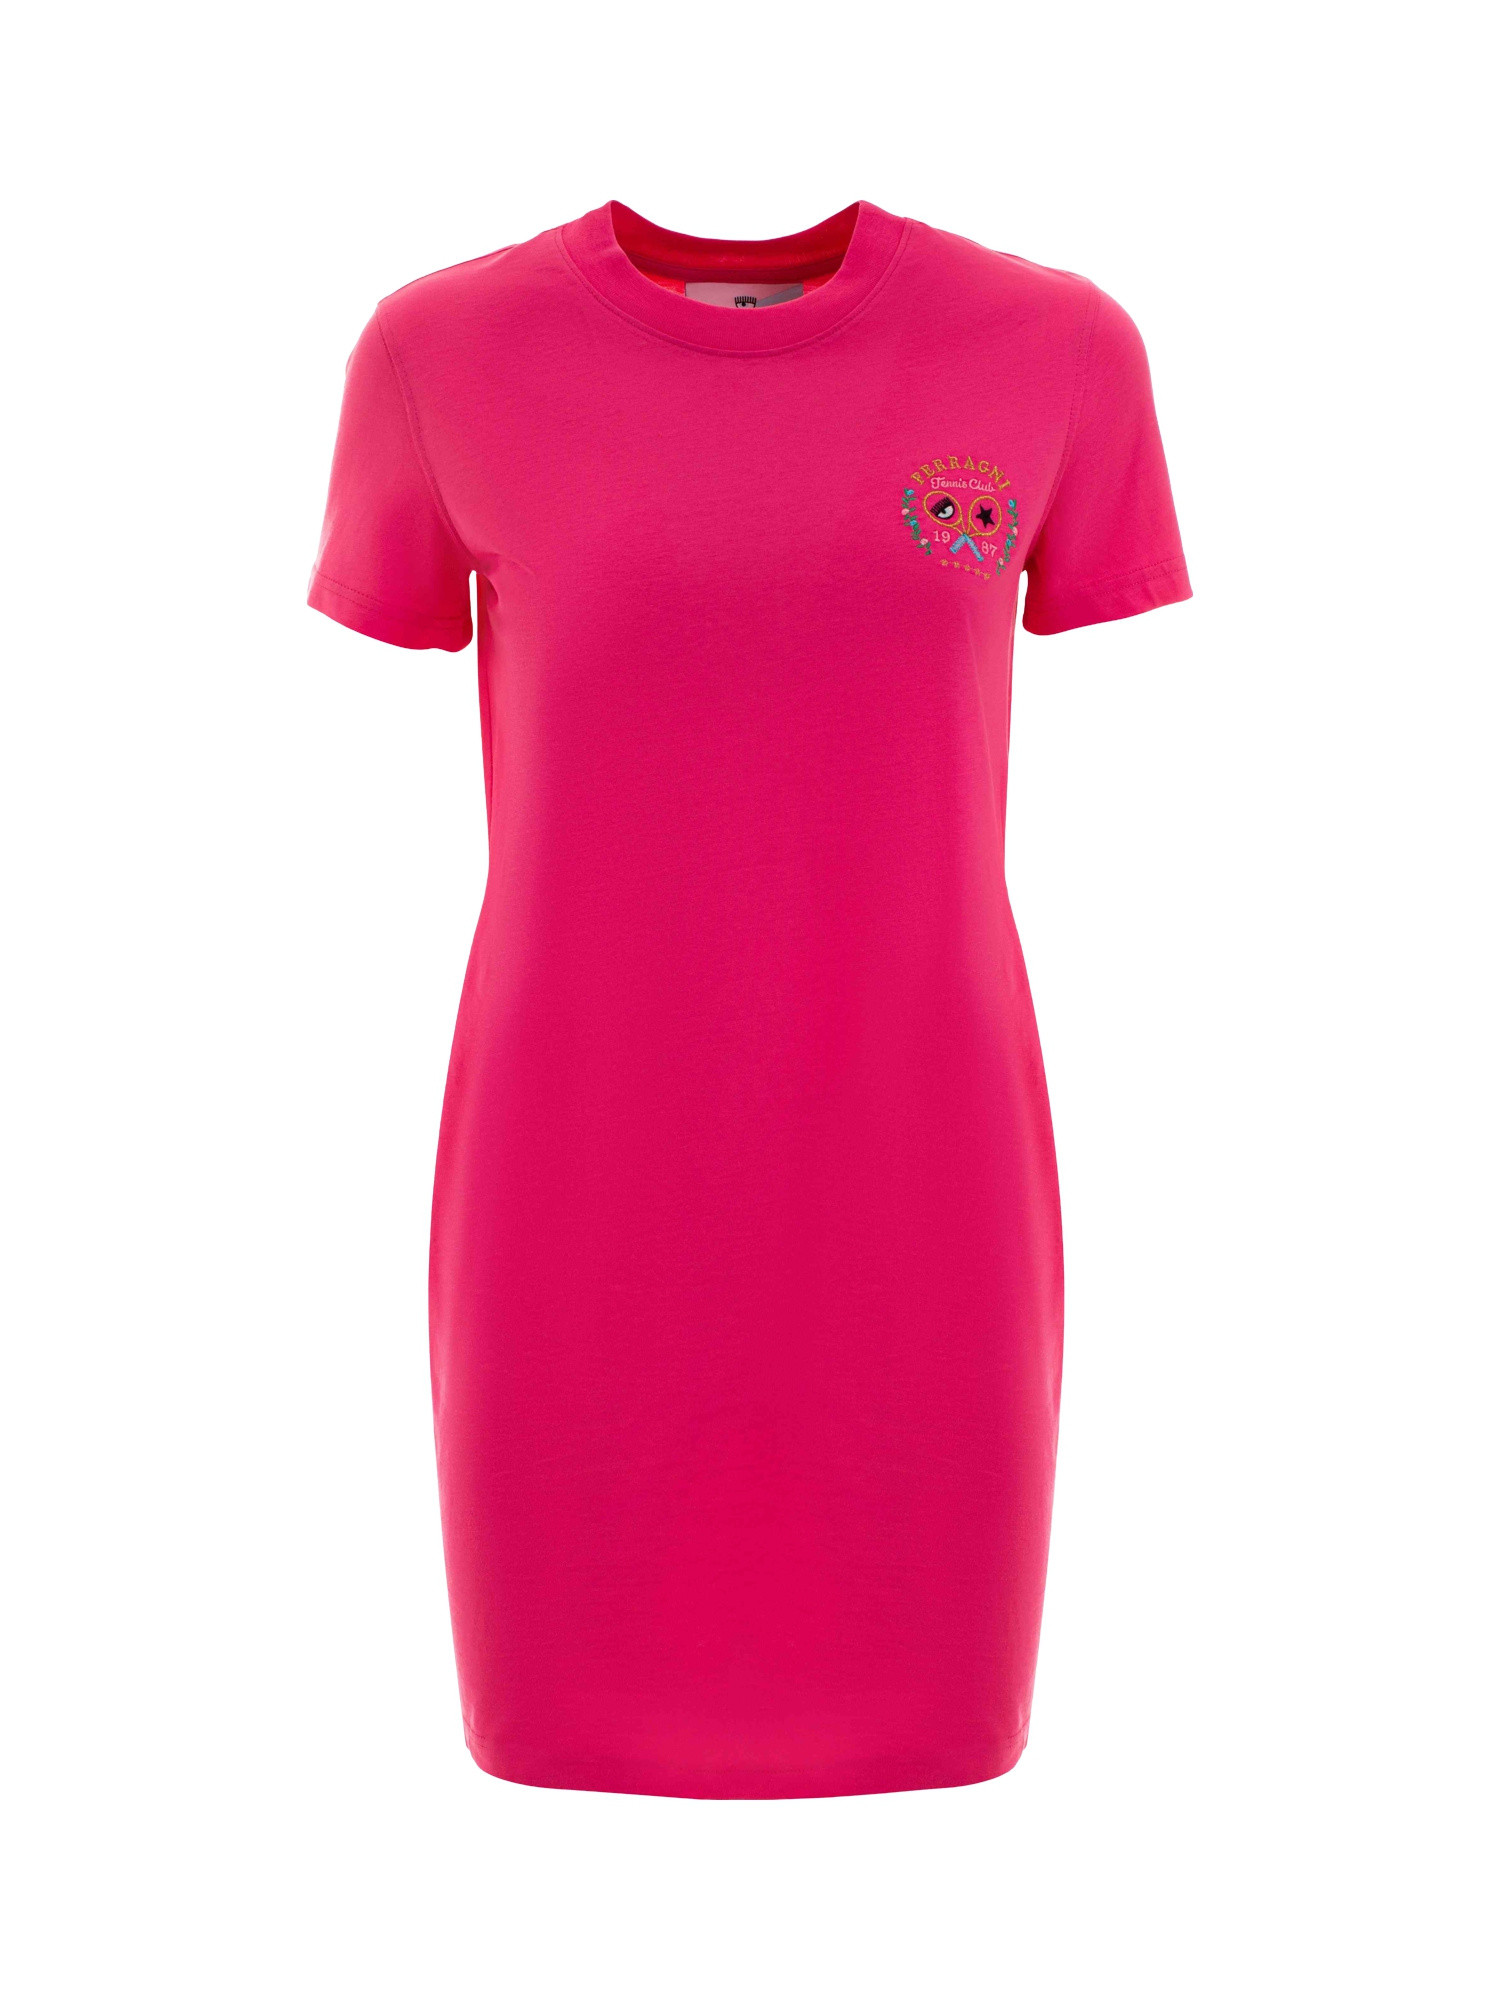 Chiara Ferragni - Short sleeve dress with embroidered logo, Pink Fuchsia, large image number 0